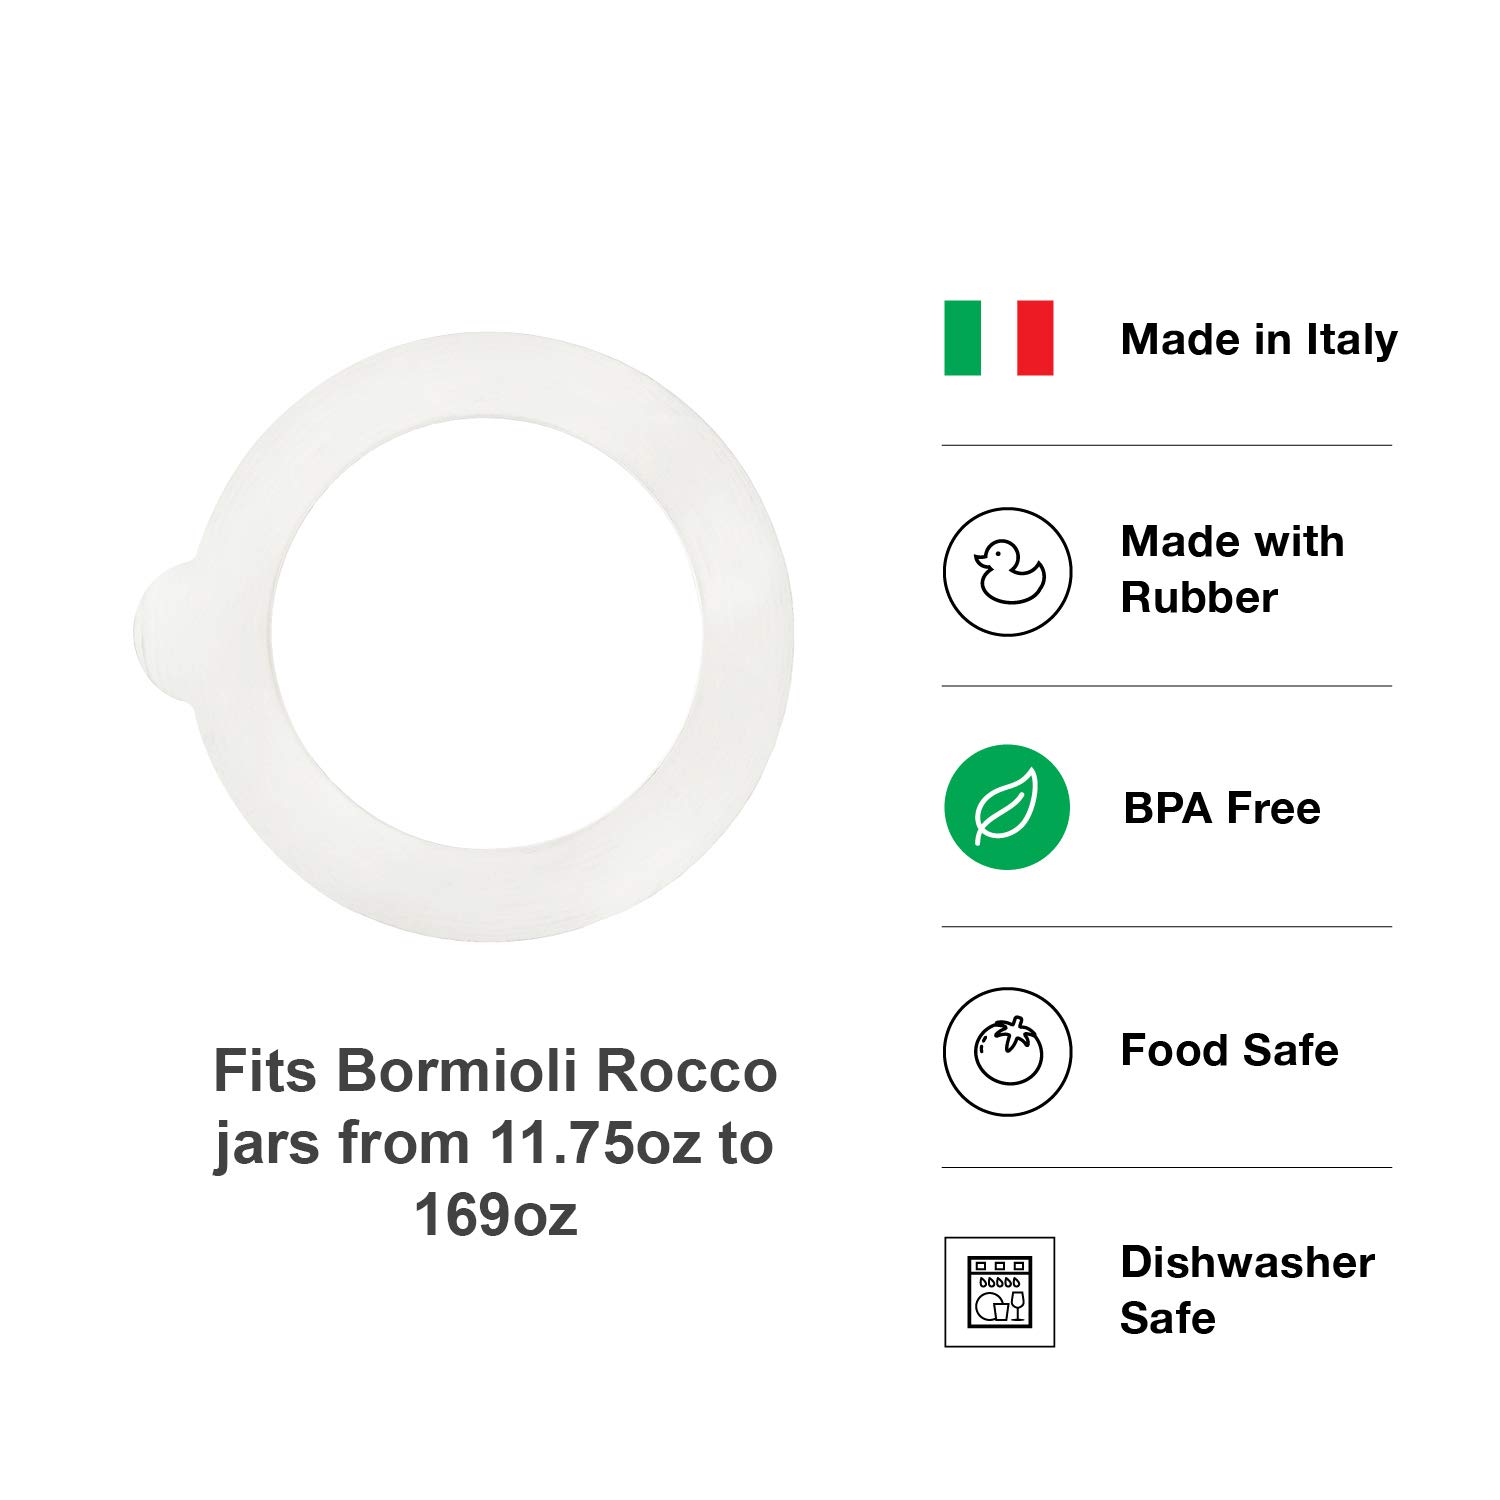 Bormioli Rocco Jar Replacement Gaskets (Set of 6): 3.5’’ Diameter Fido Jar Compatible, Food Grade Rubber, Leakproof Sealing Rings for Standard Sized Mouth Canning and Storage Containers